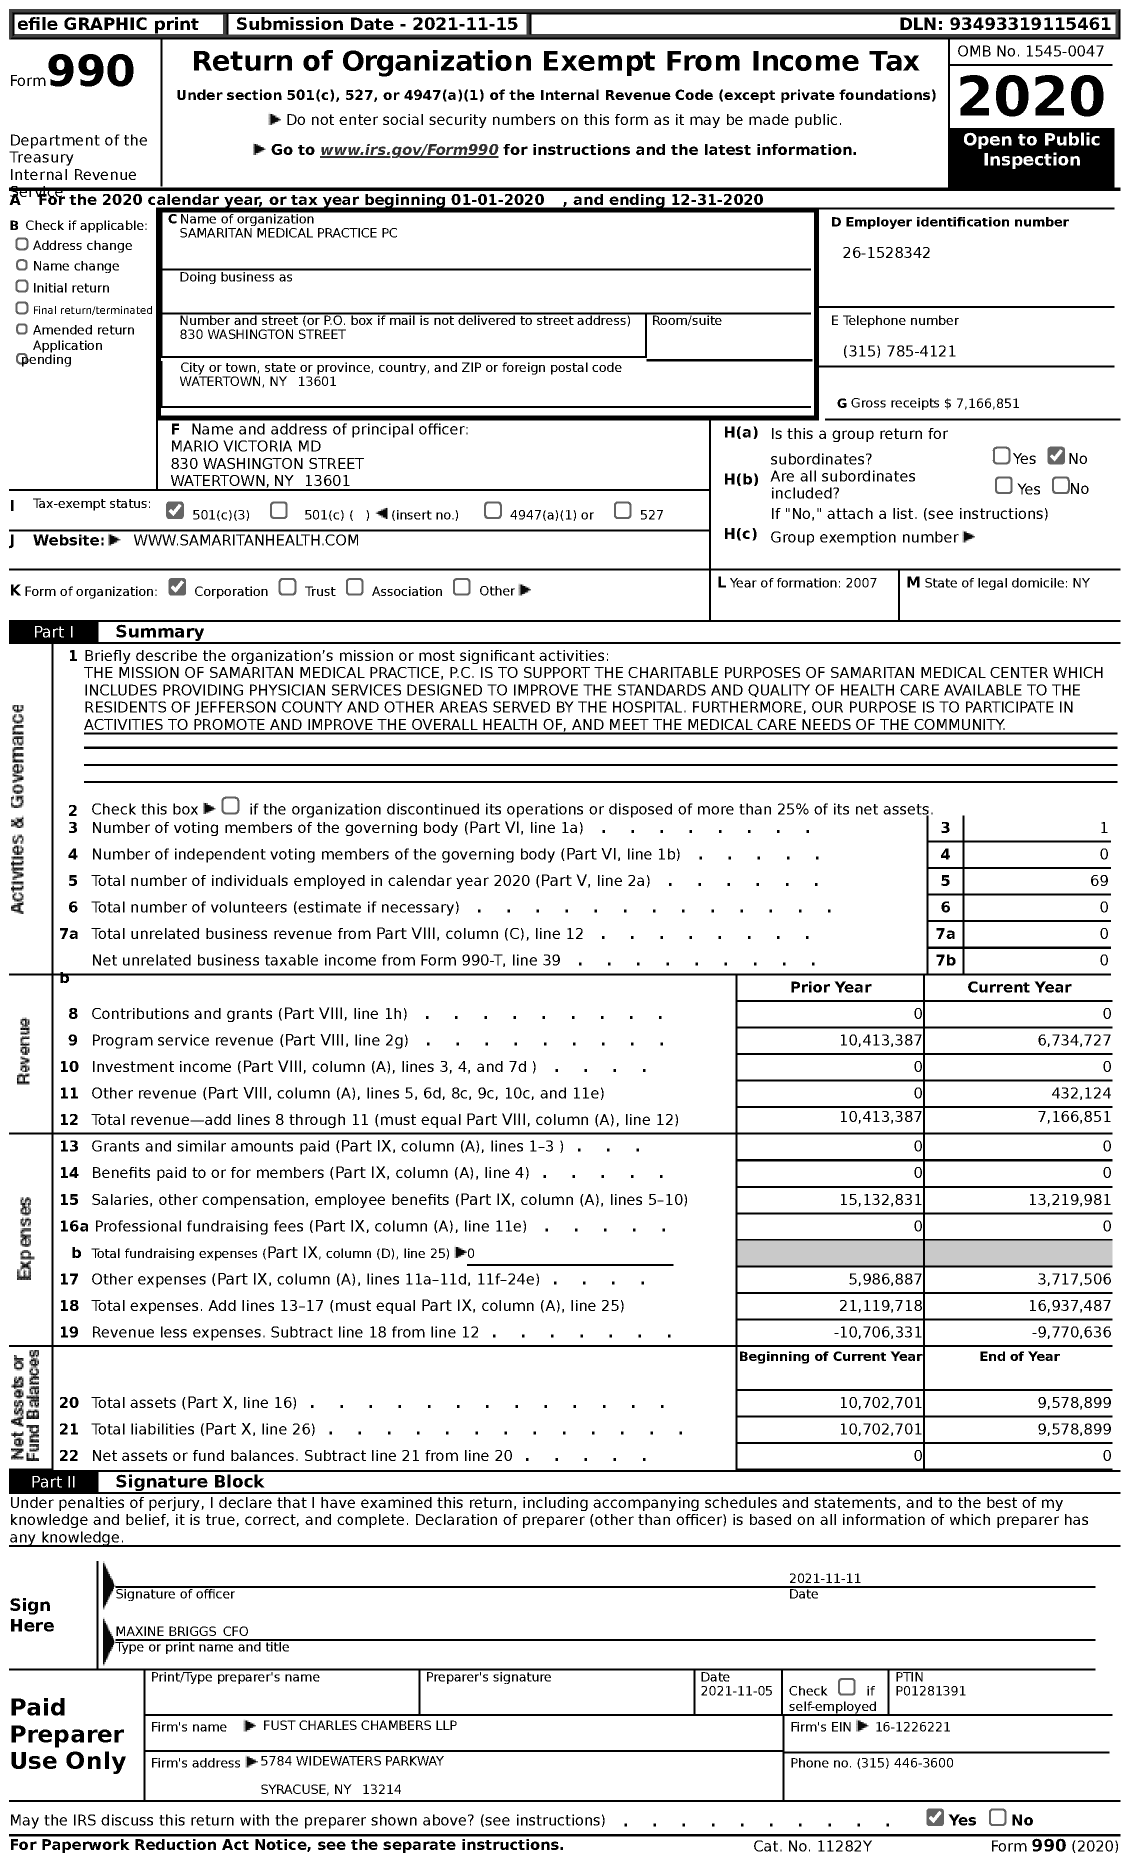 Image of first page of 2020 Form 990 for Samaritan Medical Practice PC (SMC)